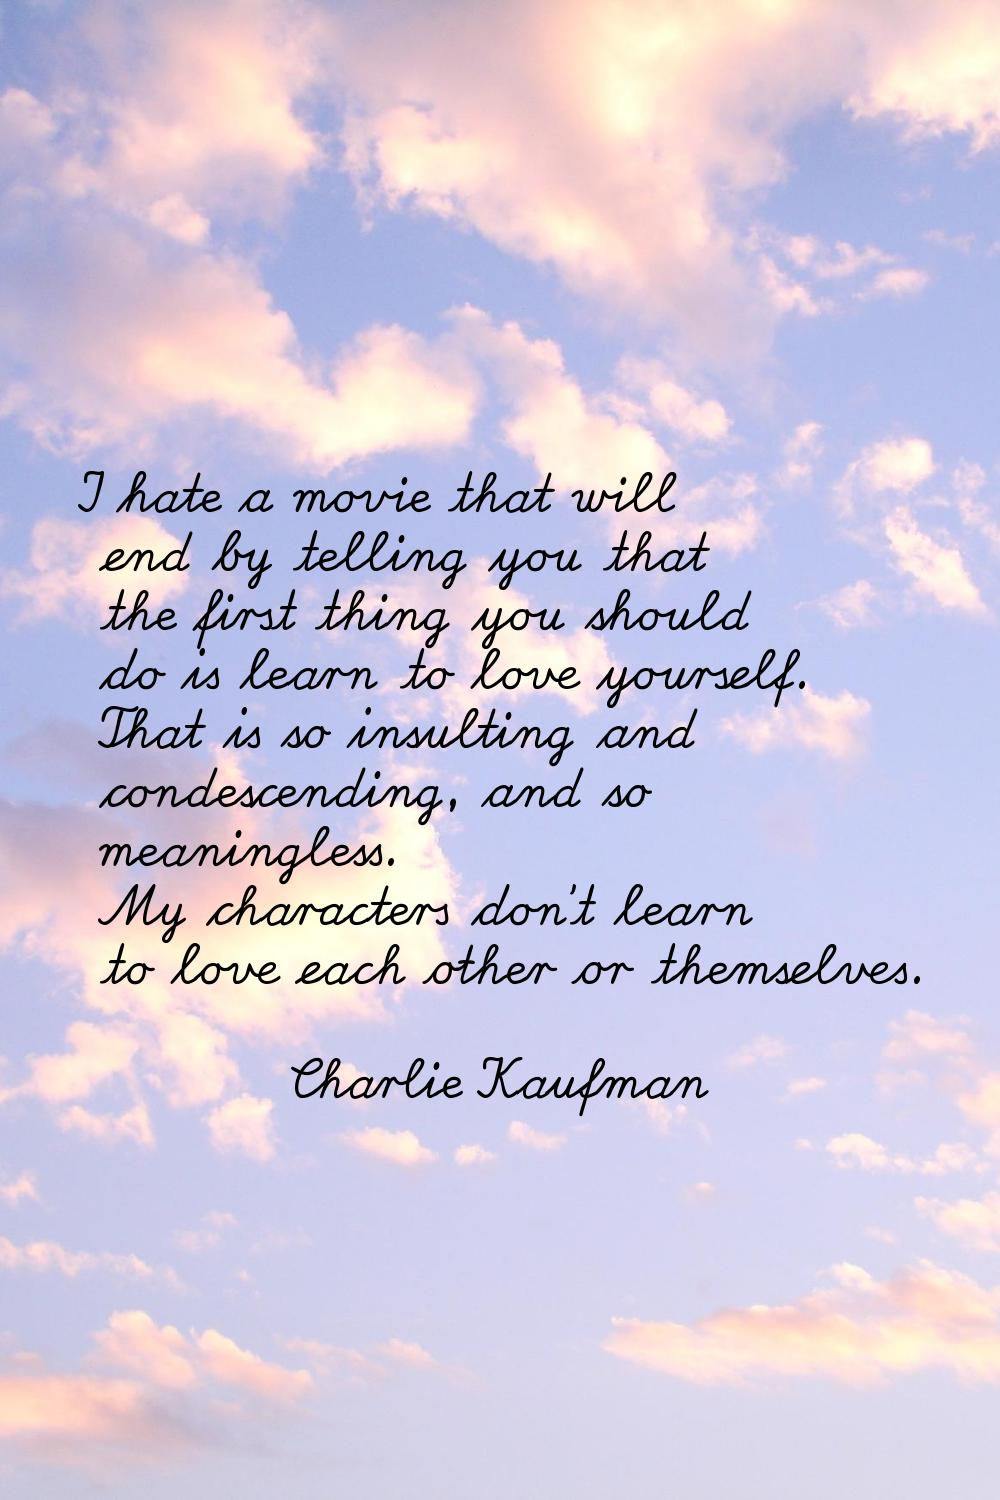 I hate a movie that will end by telling you that the first thing you should do is learn to love you